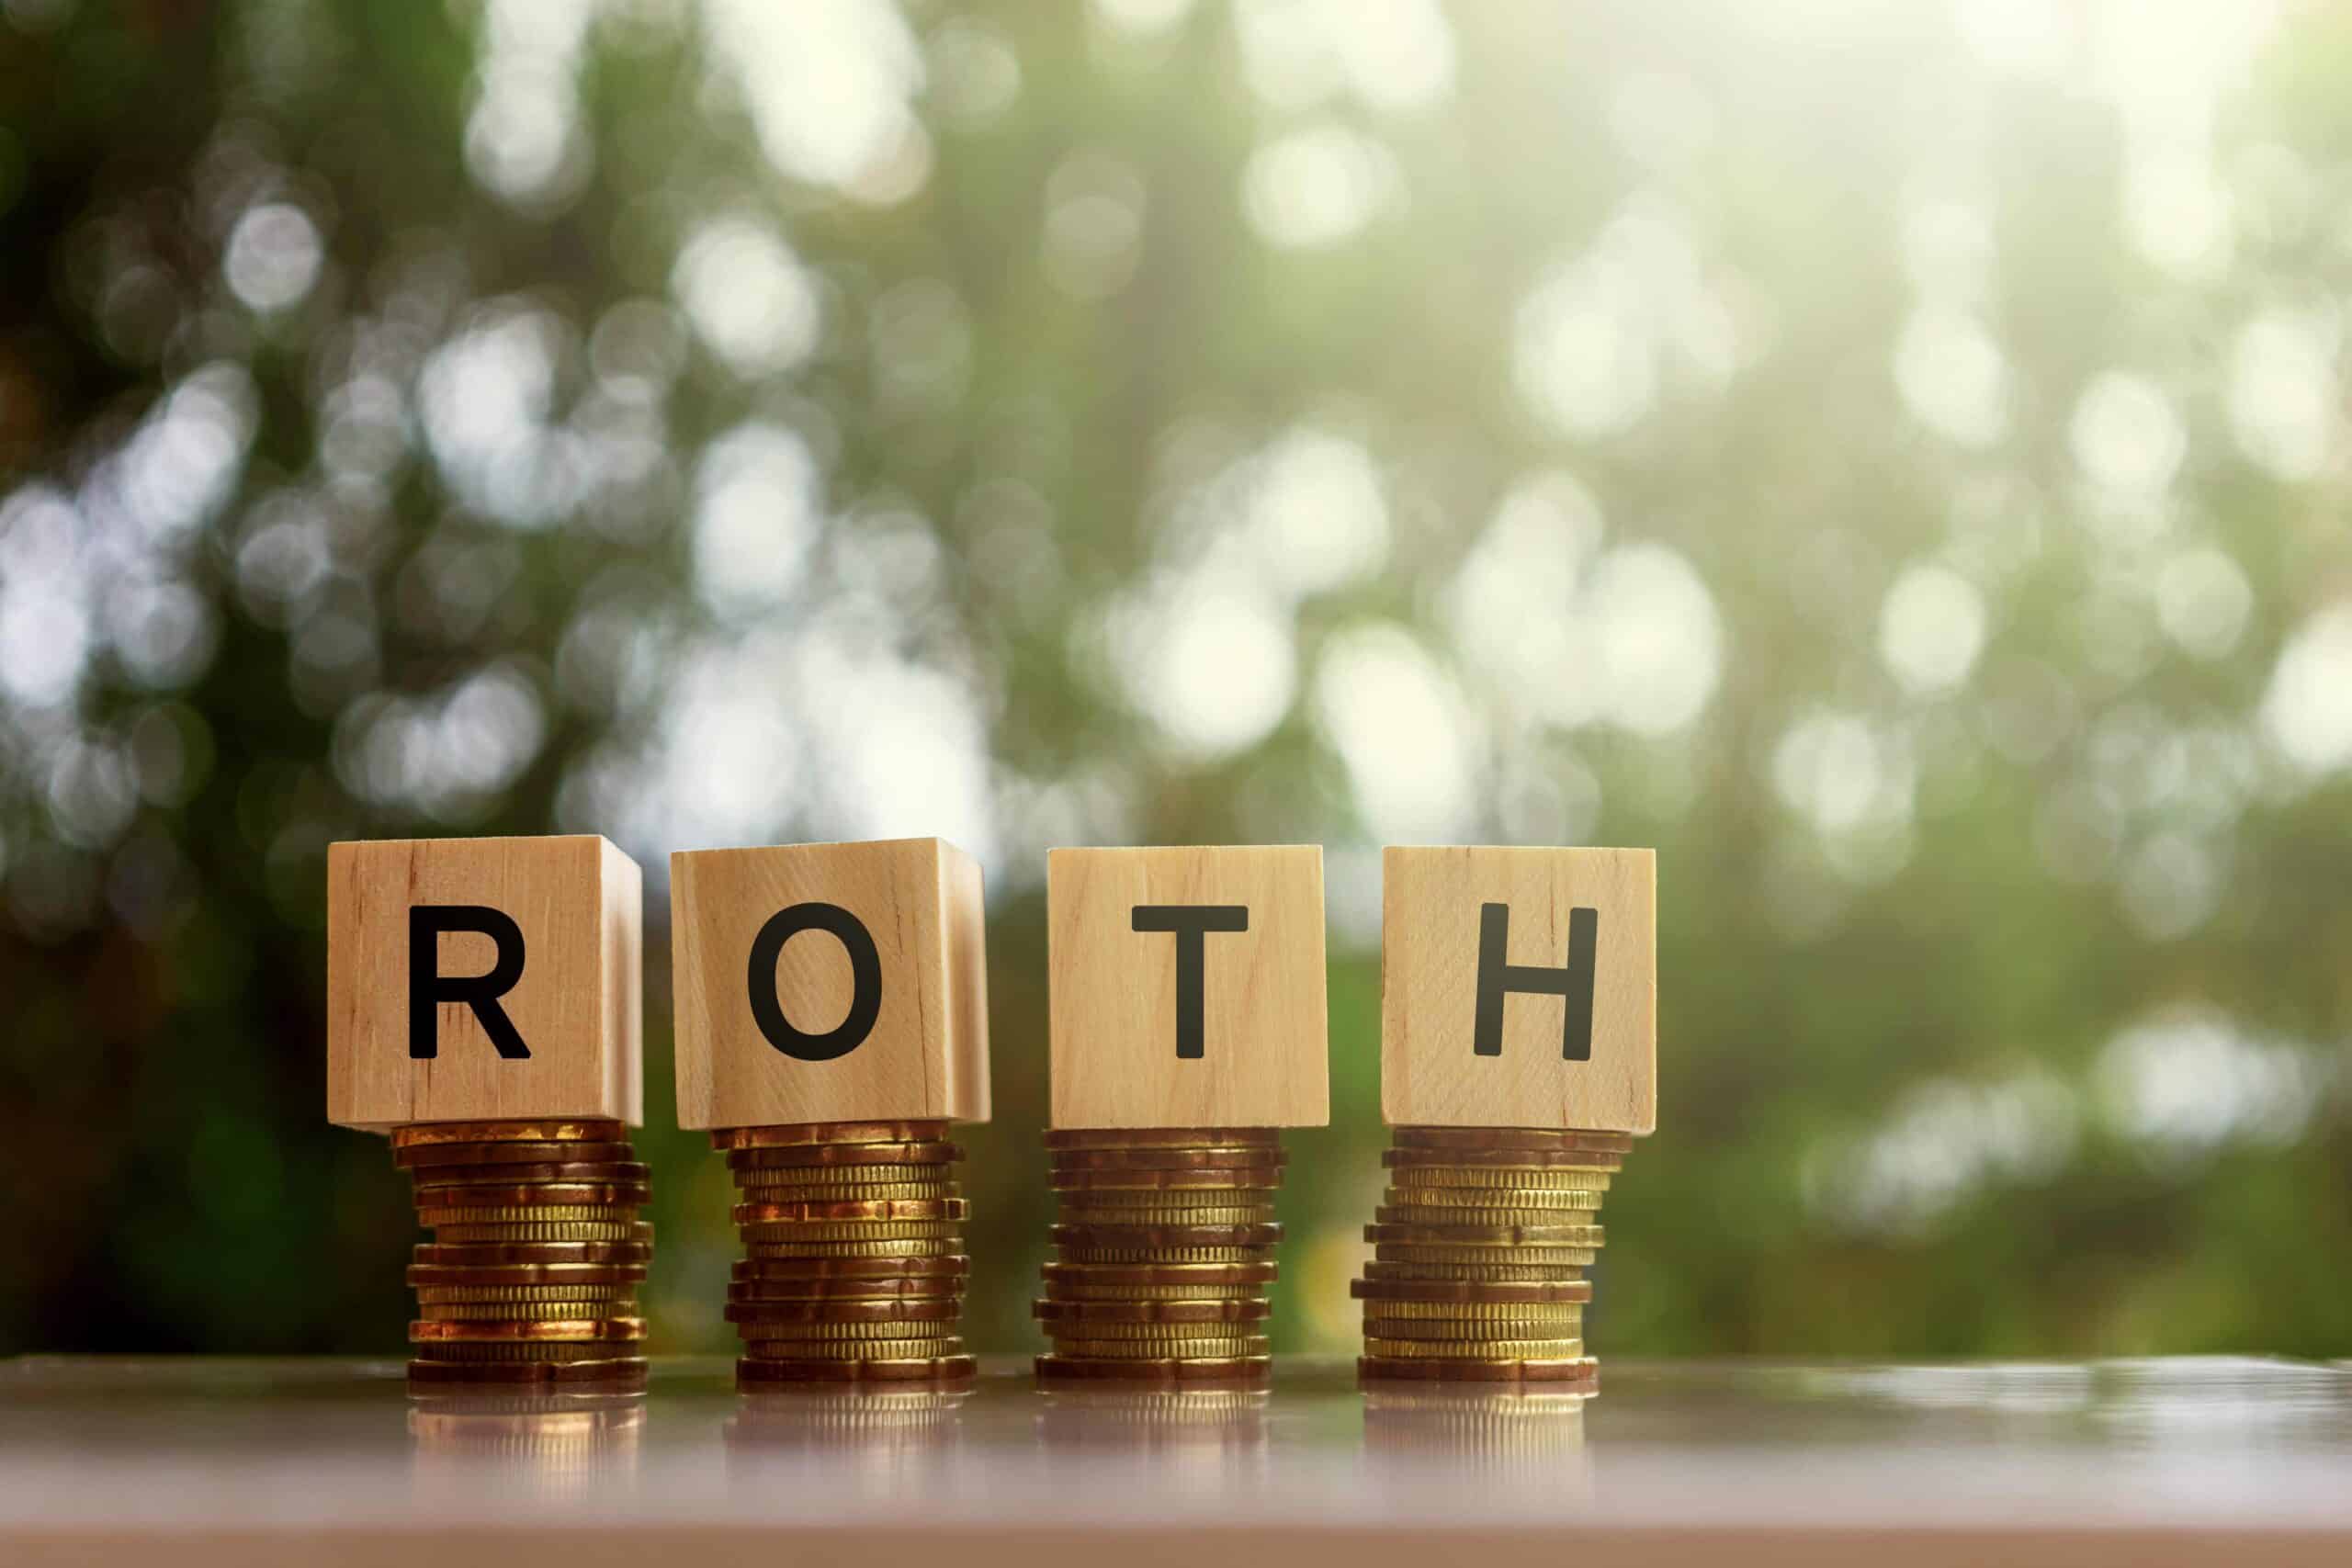 Roth spelled out in blocks on top of coins